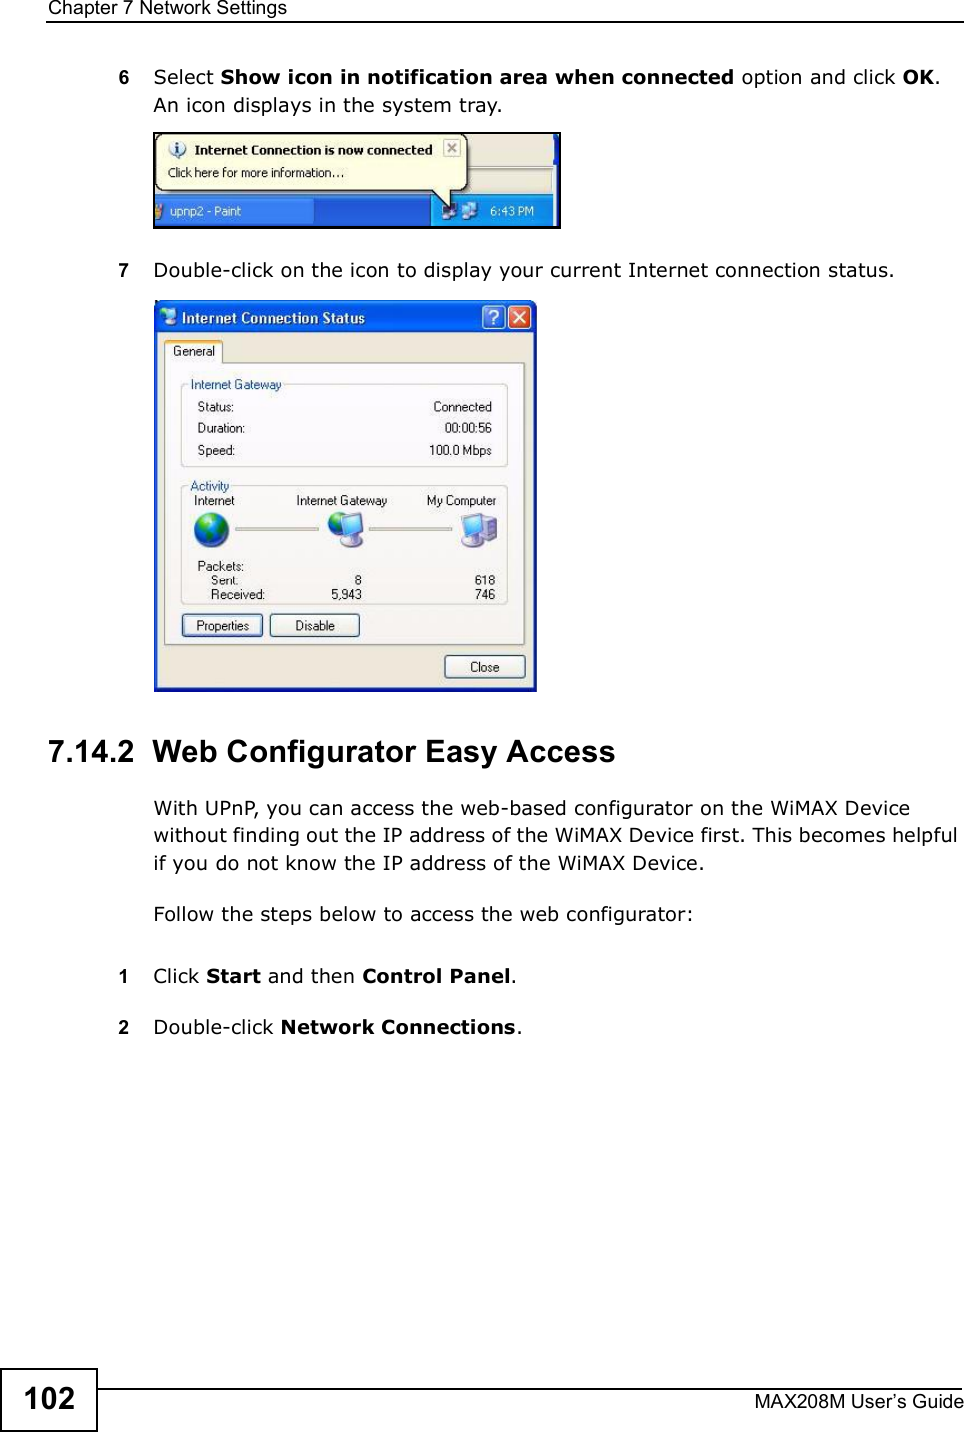 Chapter 7Network SettingsMAX208M User s Guide1026Select Show icon in notification area when connected option and click OK. An icon displays in the system tray. 7Double-click on the icon to display your current Internet connection status.7.14.2  Web Configurator Easy AccessWith UPnP, you can access the web-based configurator on the WiMAX Device without finding out the IP address of the WiMAX Device first. This becomes helpful if you do not know the IP address of the WiMAX Device.Follow the steps below to access the web configurator:1Click Start and then Control Panel. 2Double-click Network Connections. 